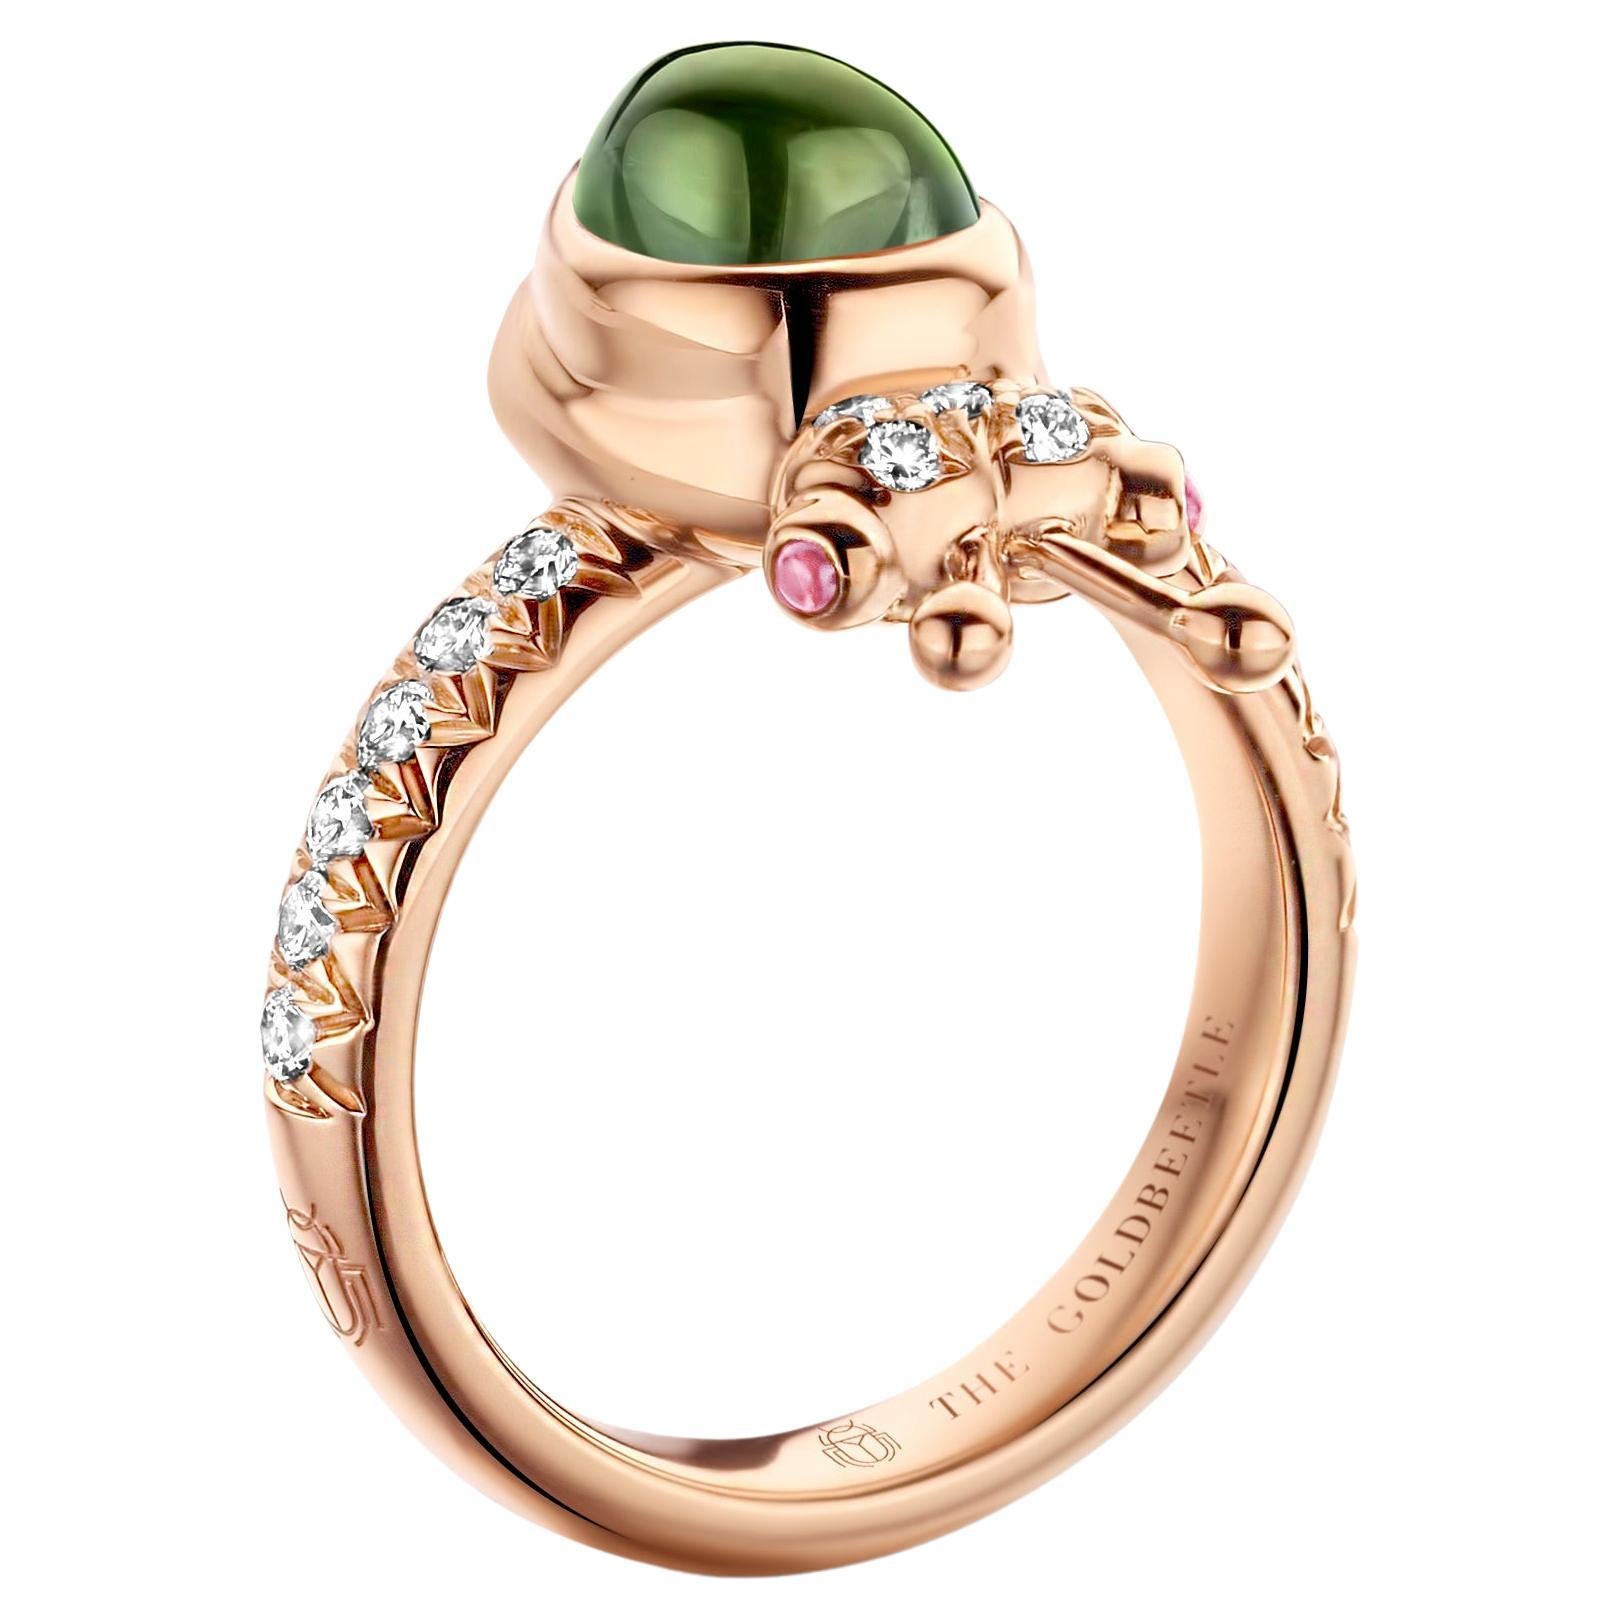 One-of-a-kind lucky beetle ring in 18 karat rose gold 8,6 g set with the finest diamonds in brilliant cut 0,34 carat (VVS/DEF quality) one natural, green tourmaline in pear cabochon cut and two pink tourmalines in round cabochon cut.
